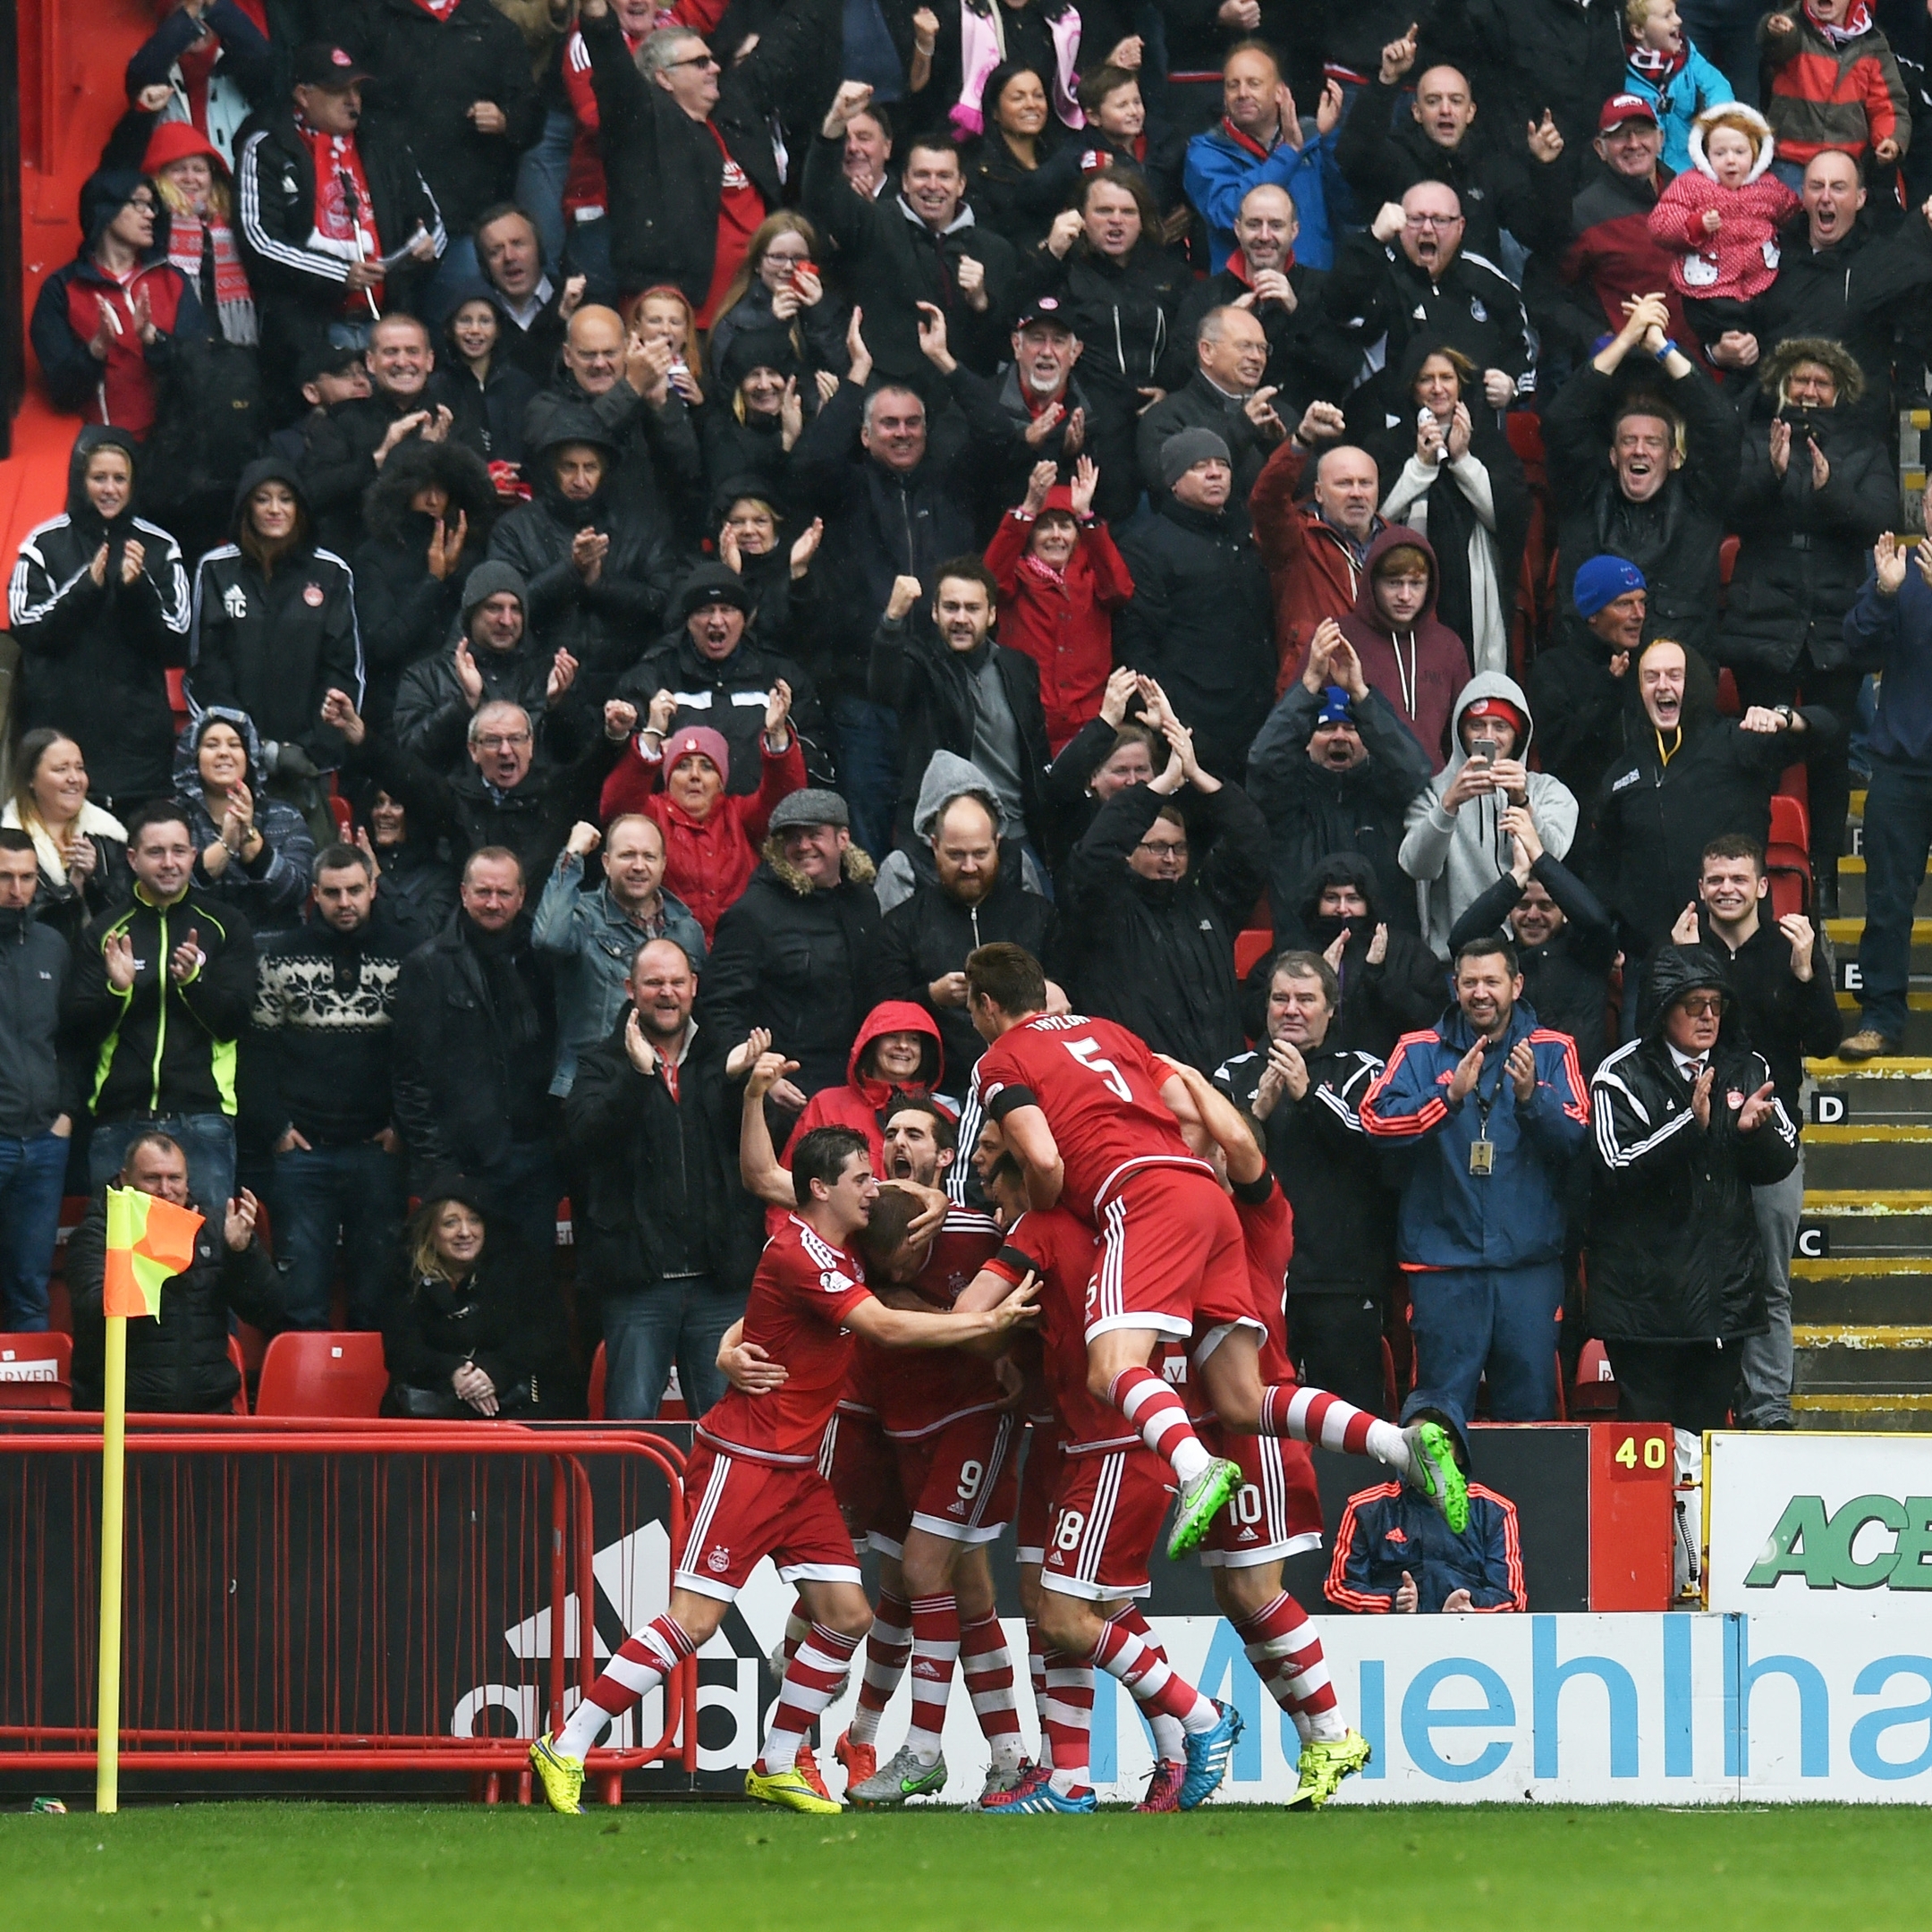 The Aberdeen players celebrate their equalising goal in front of the Dons fans